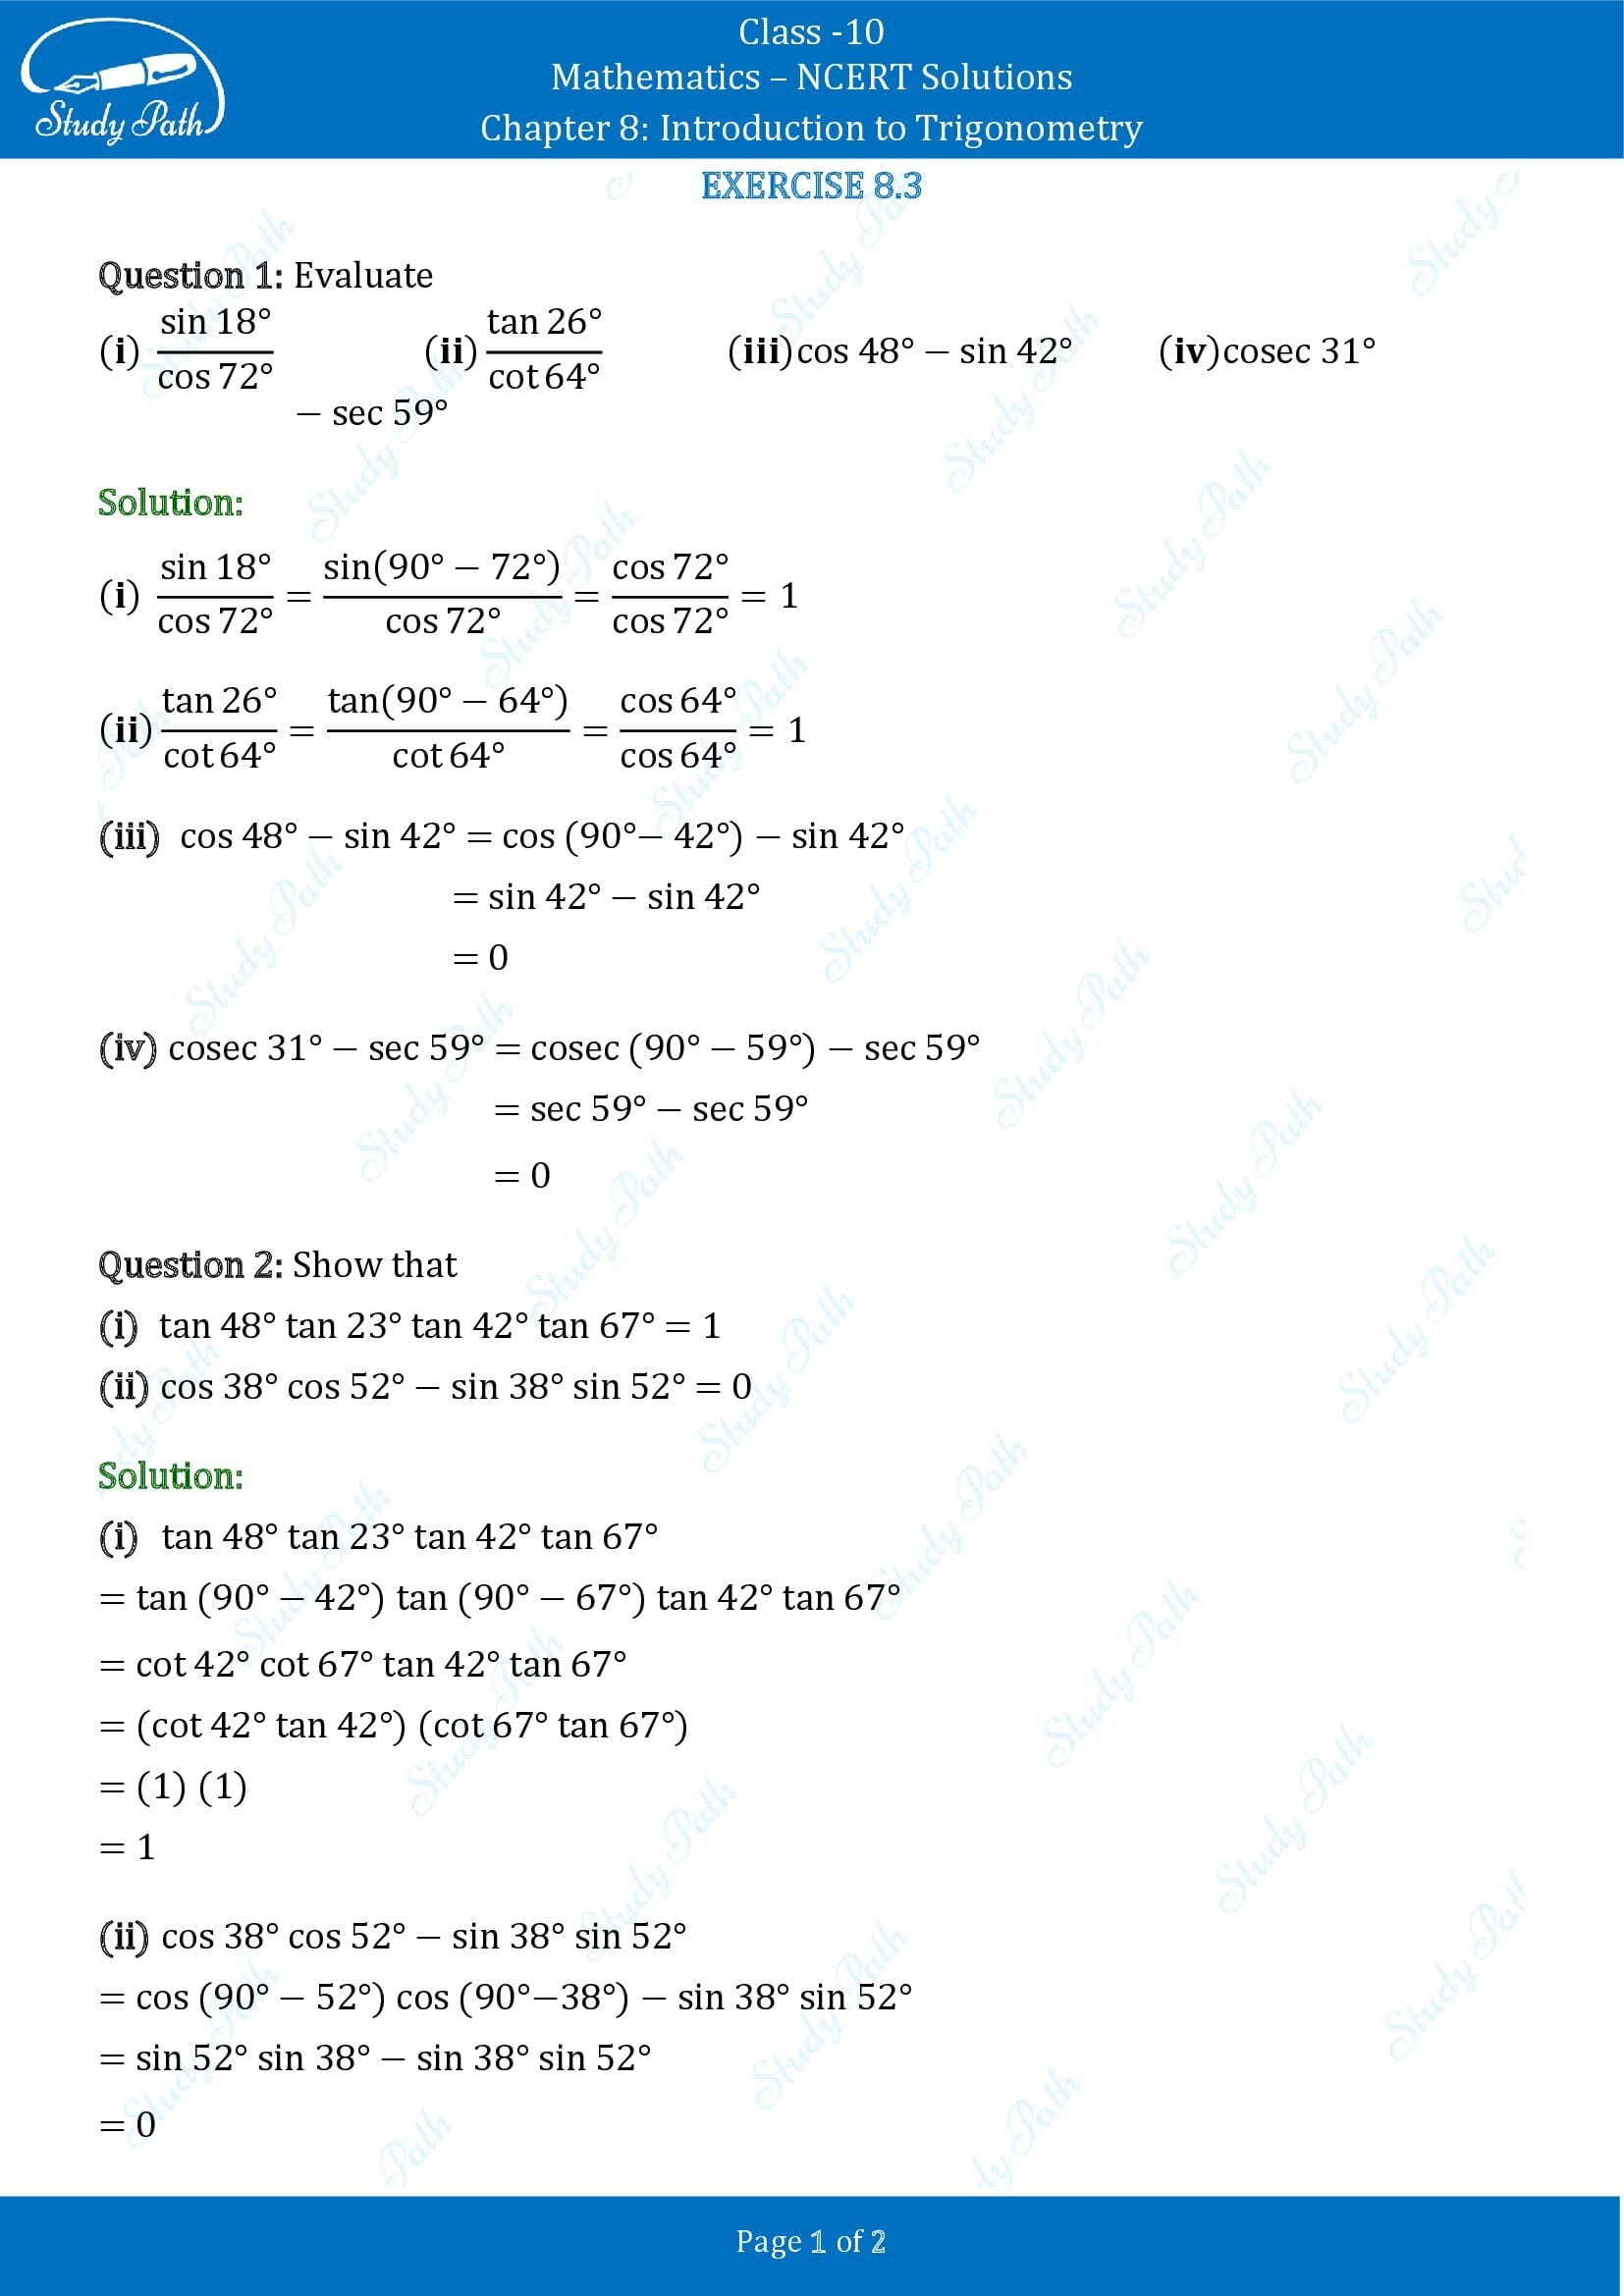 NCERT Solutions for Class 10 Maths Chapter 8 Introduction to Trigonometry Exercise 8.3 00001